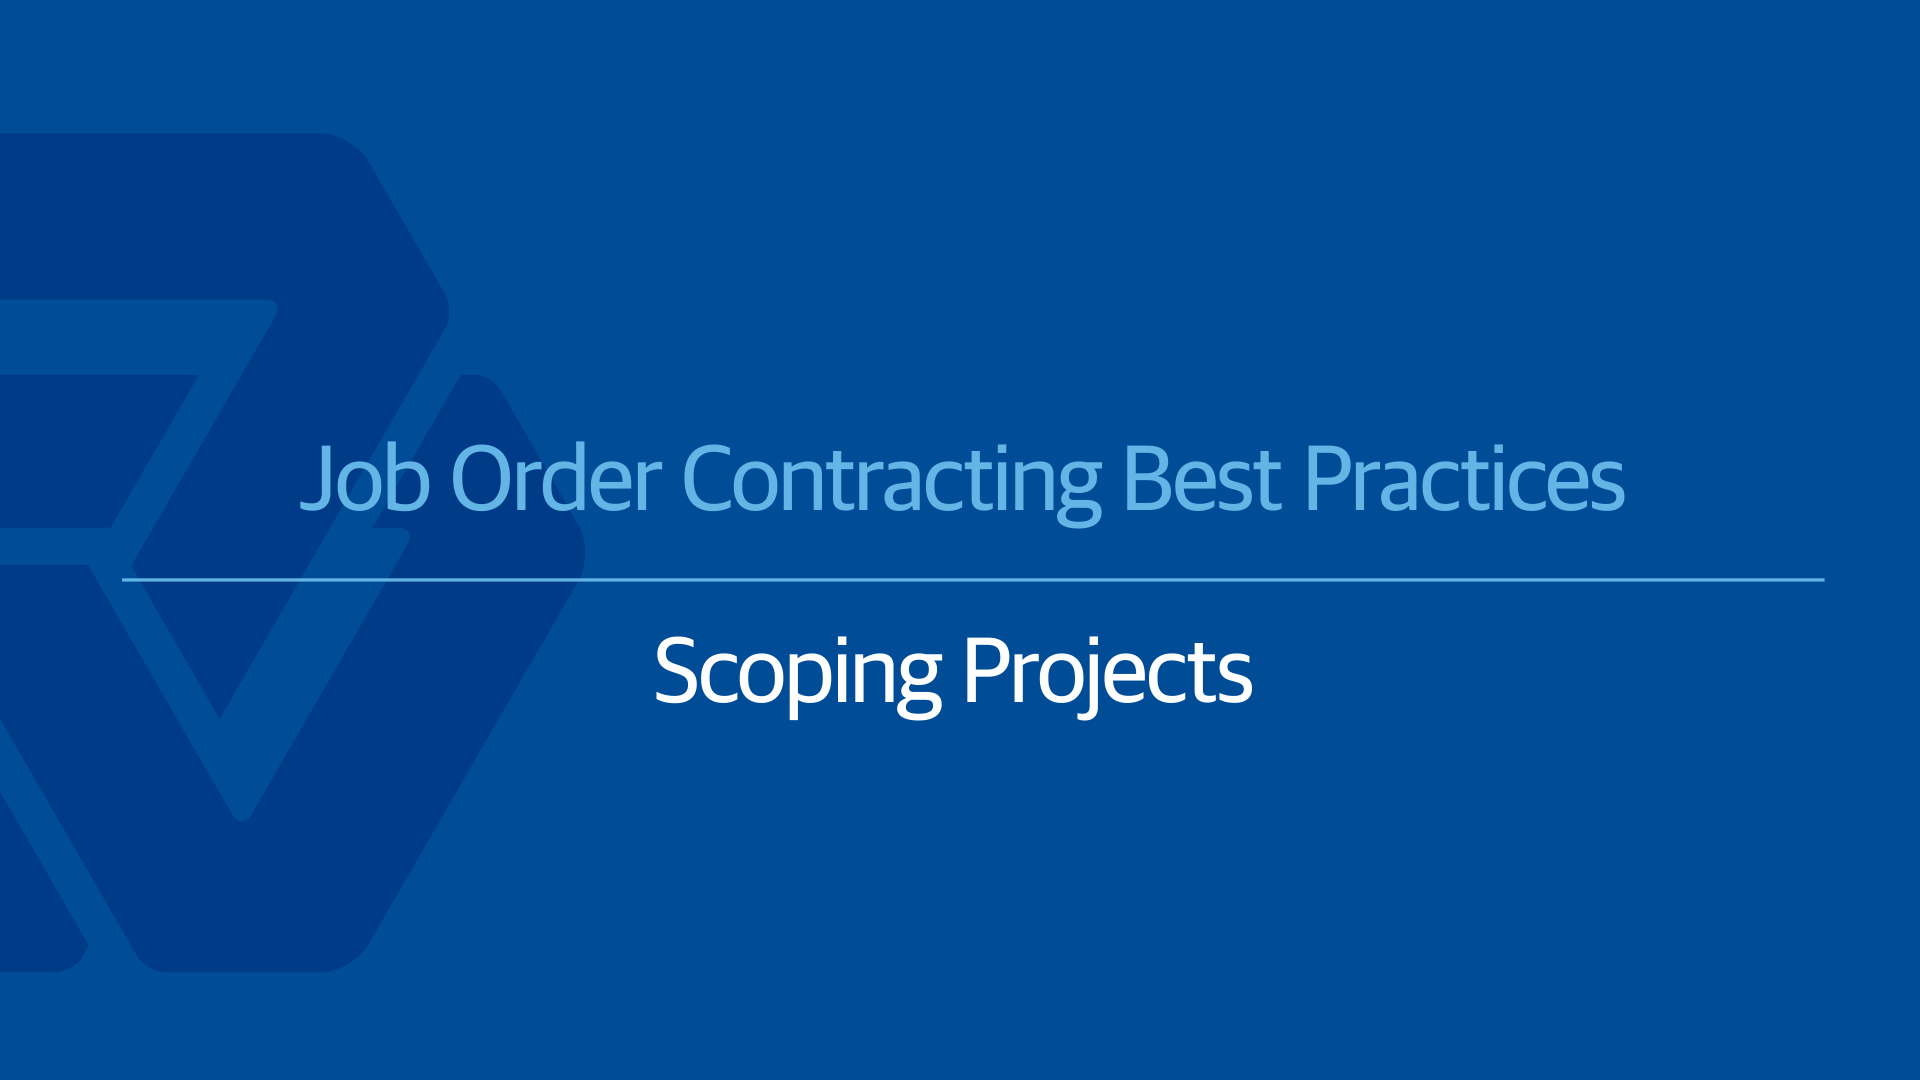 6 Great Reasons to Work with a Job Order Contracting Provider 1